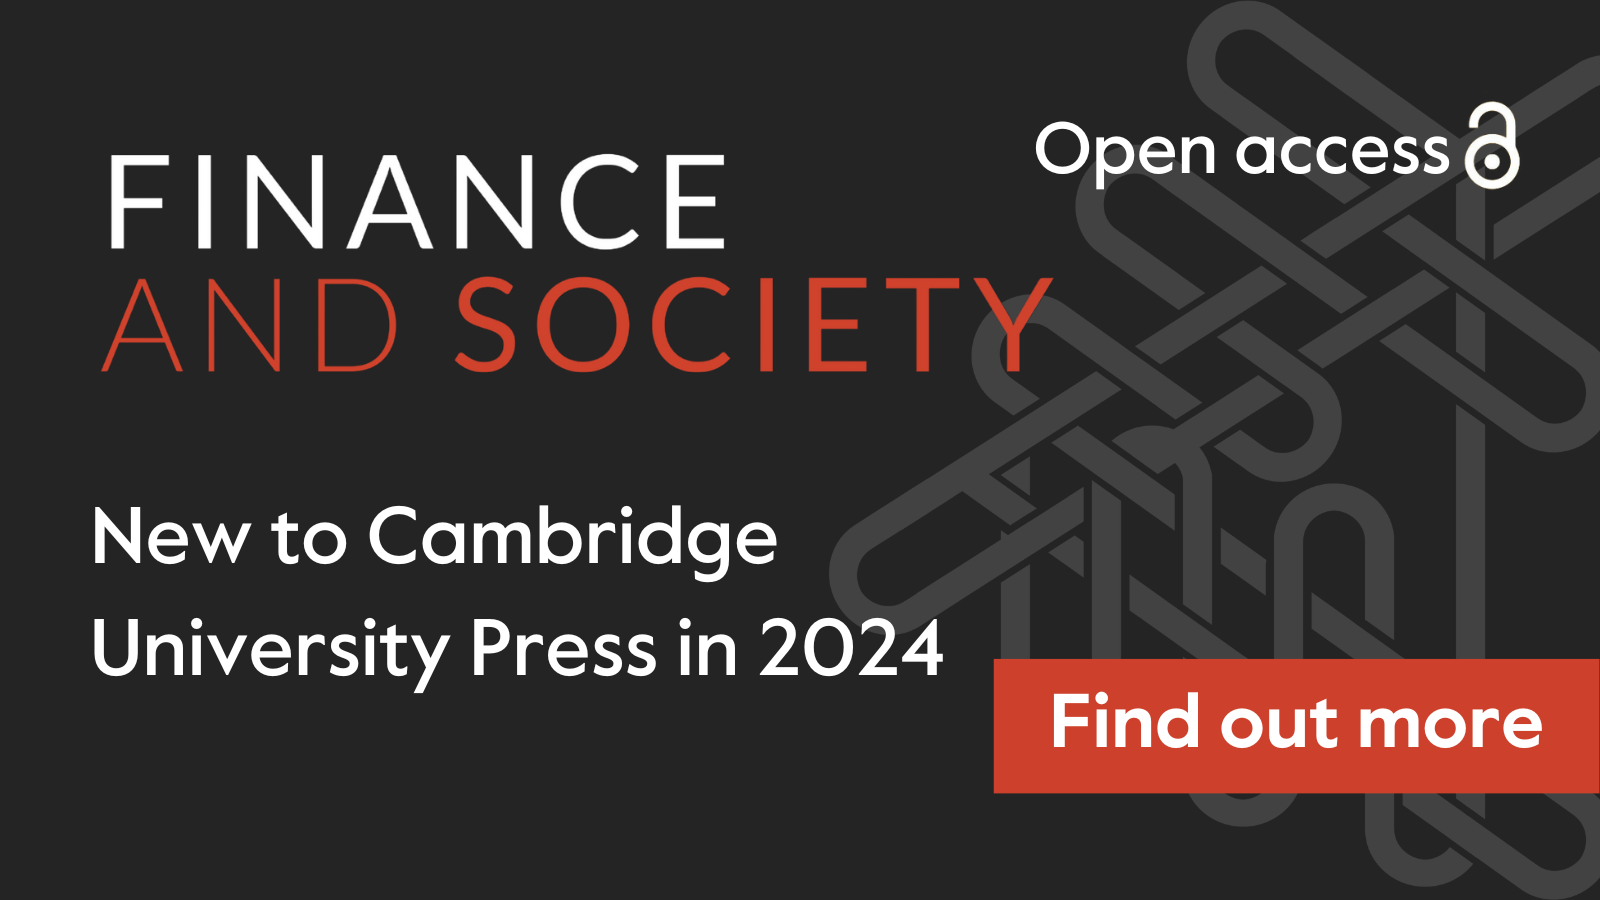 Finance and Society new to Cambridge University Press for 2024